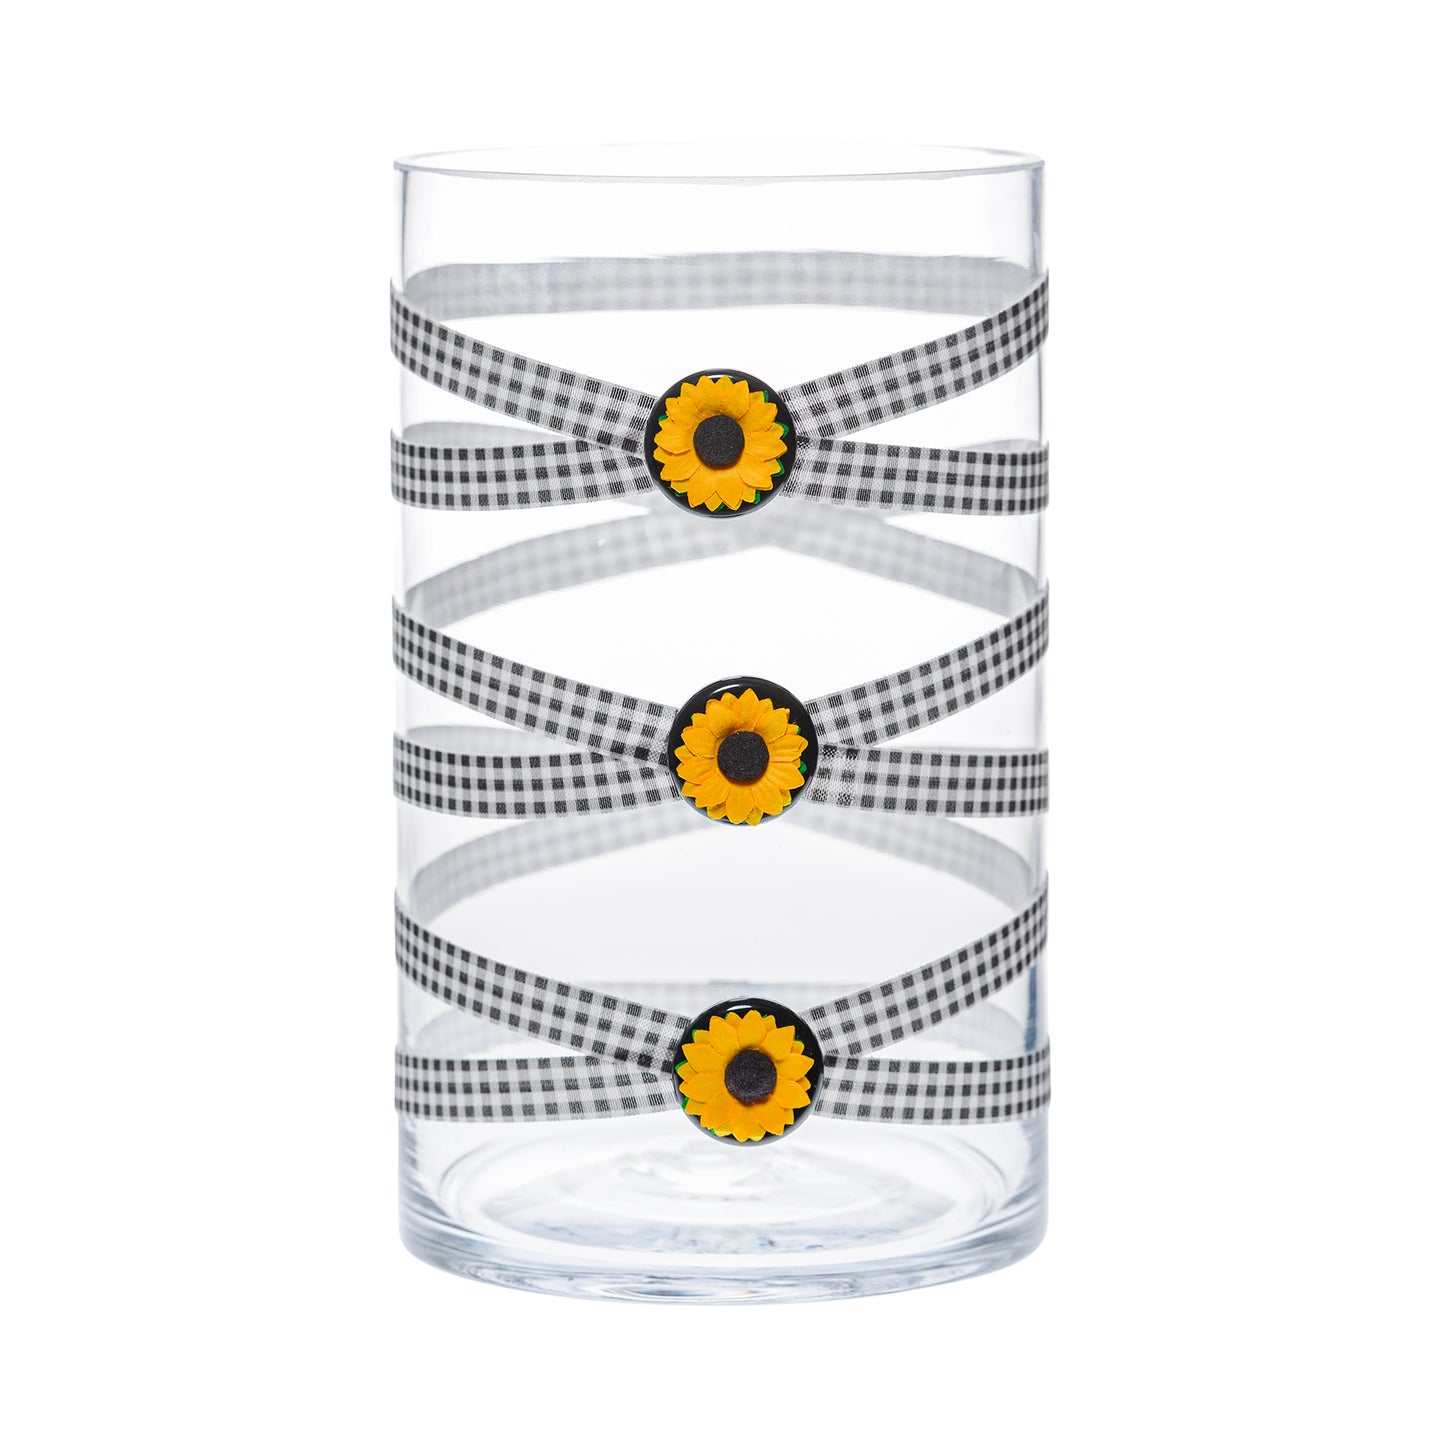 Front of Glass Wrappings 6" x 10" cylinder wrapped in black and white check elastic, decorated with 3 sunflowers.